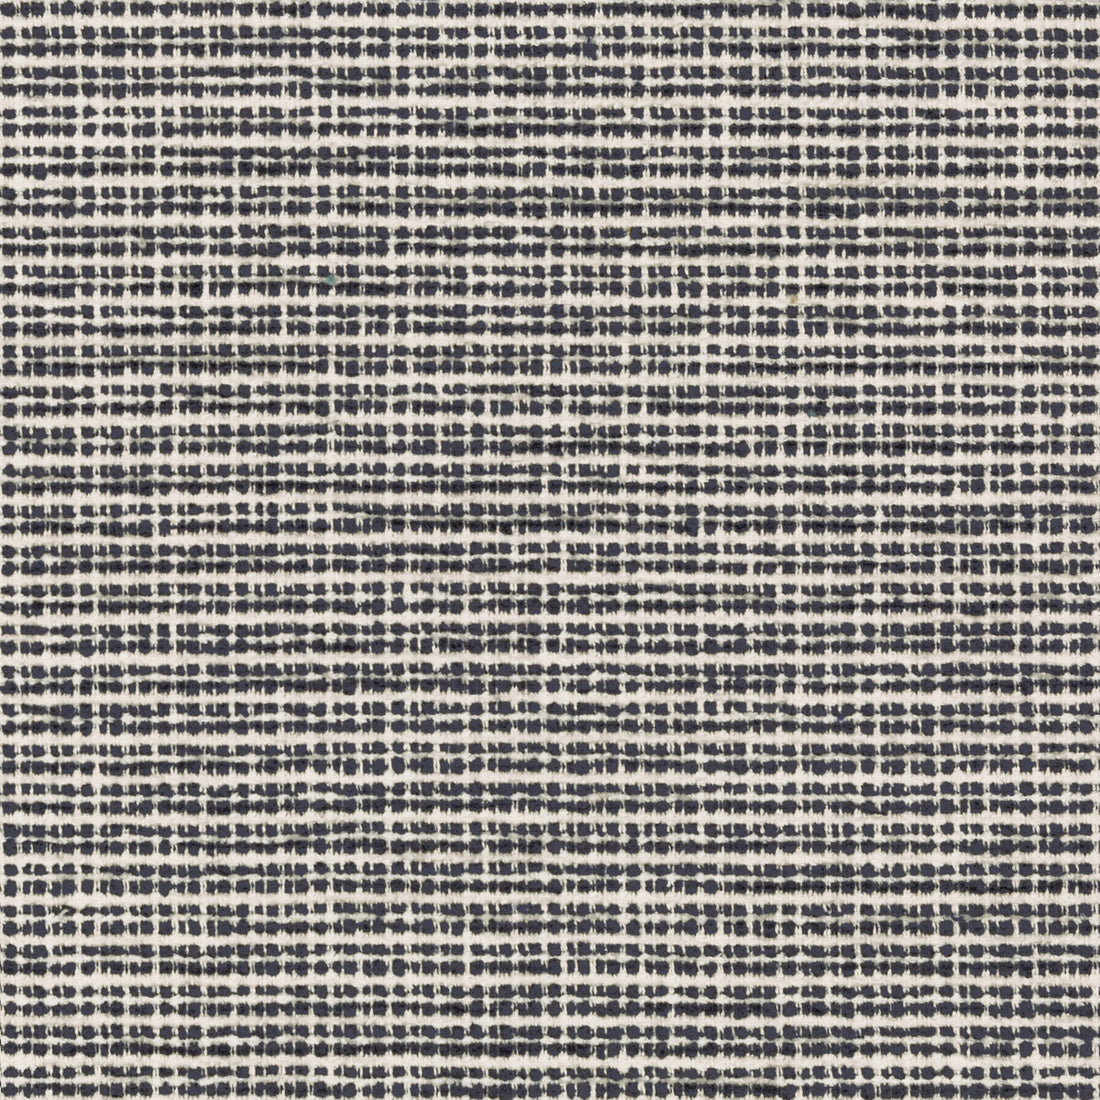 Freney Texture fabric in navy color - pattern 8019149.50.0 - by Brunschwig &amp; Fils in the Chambery Textures II collection